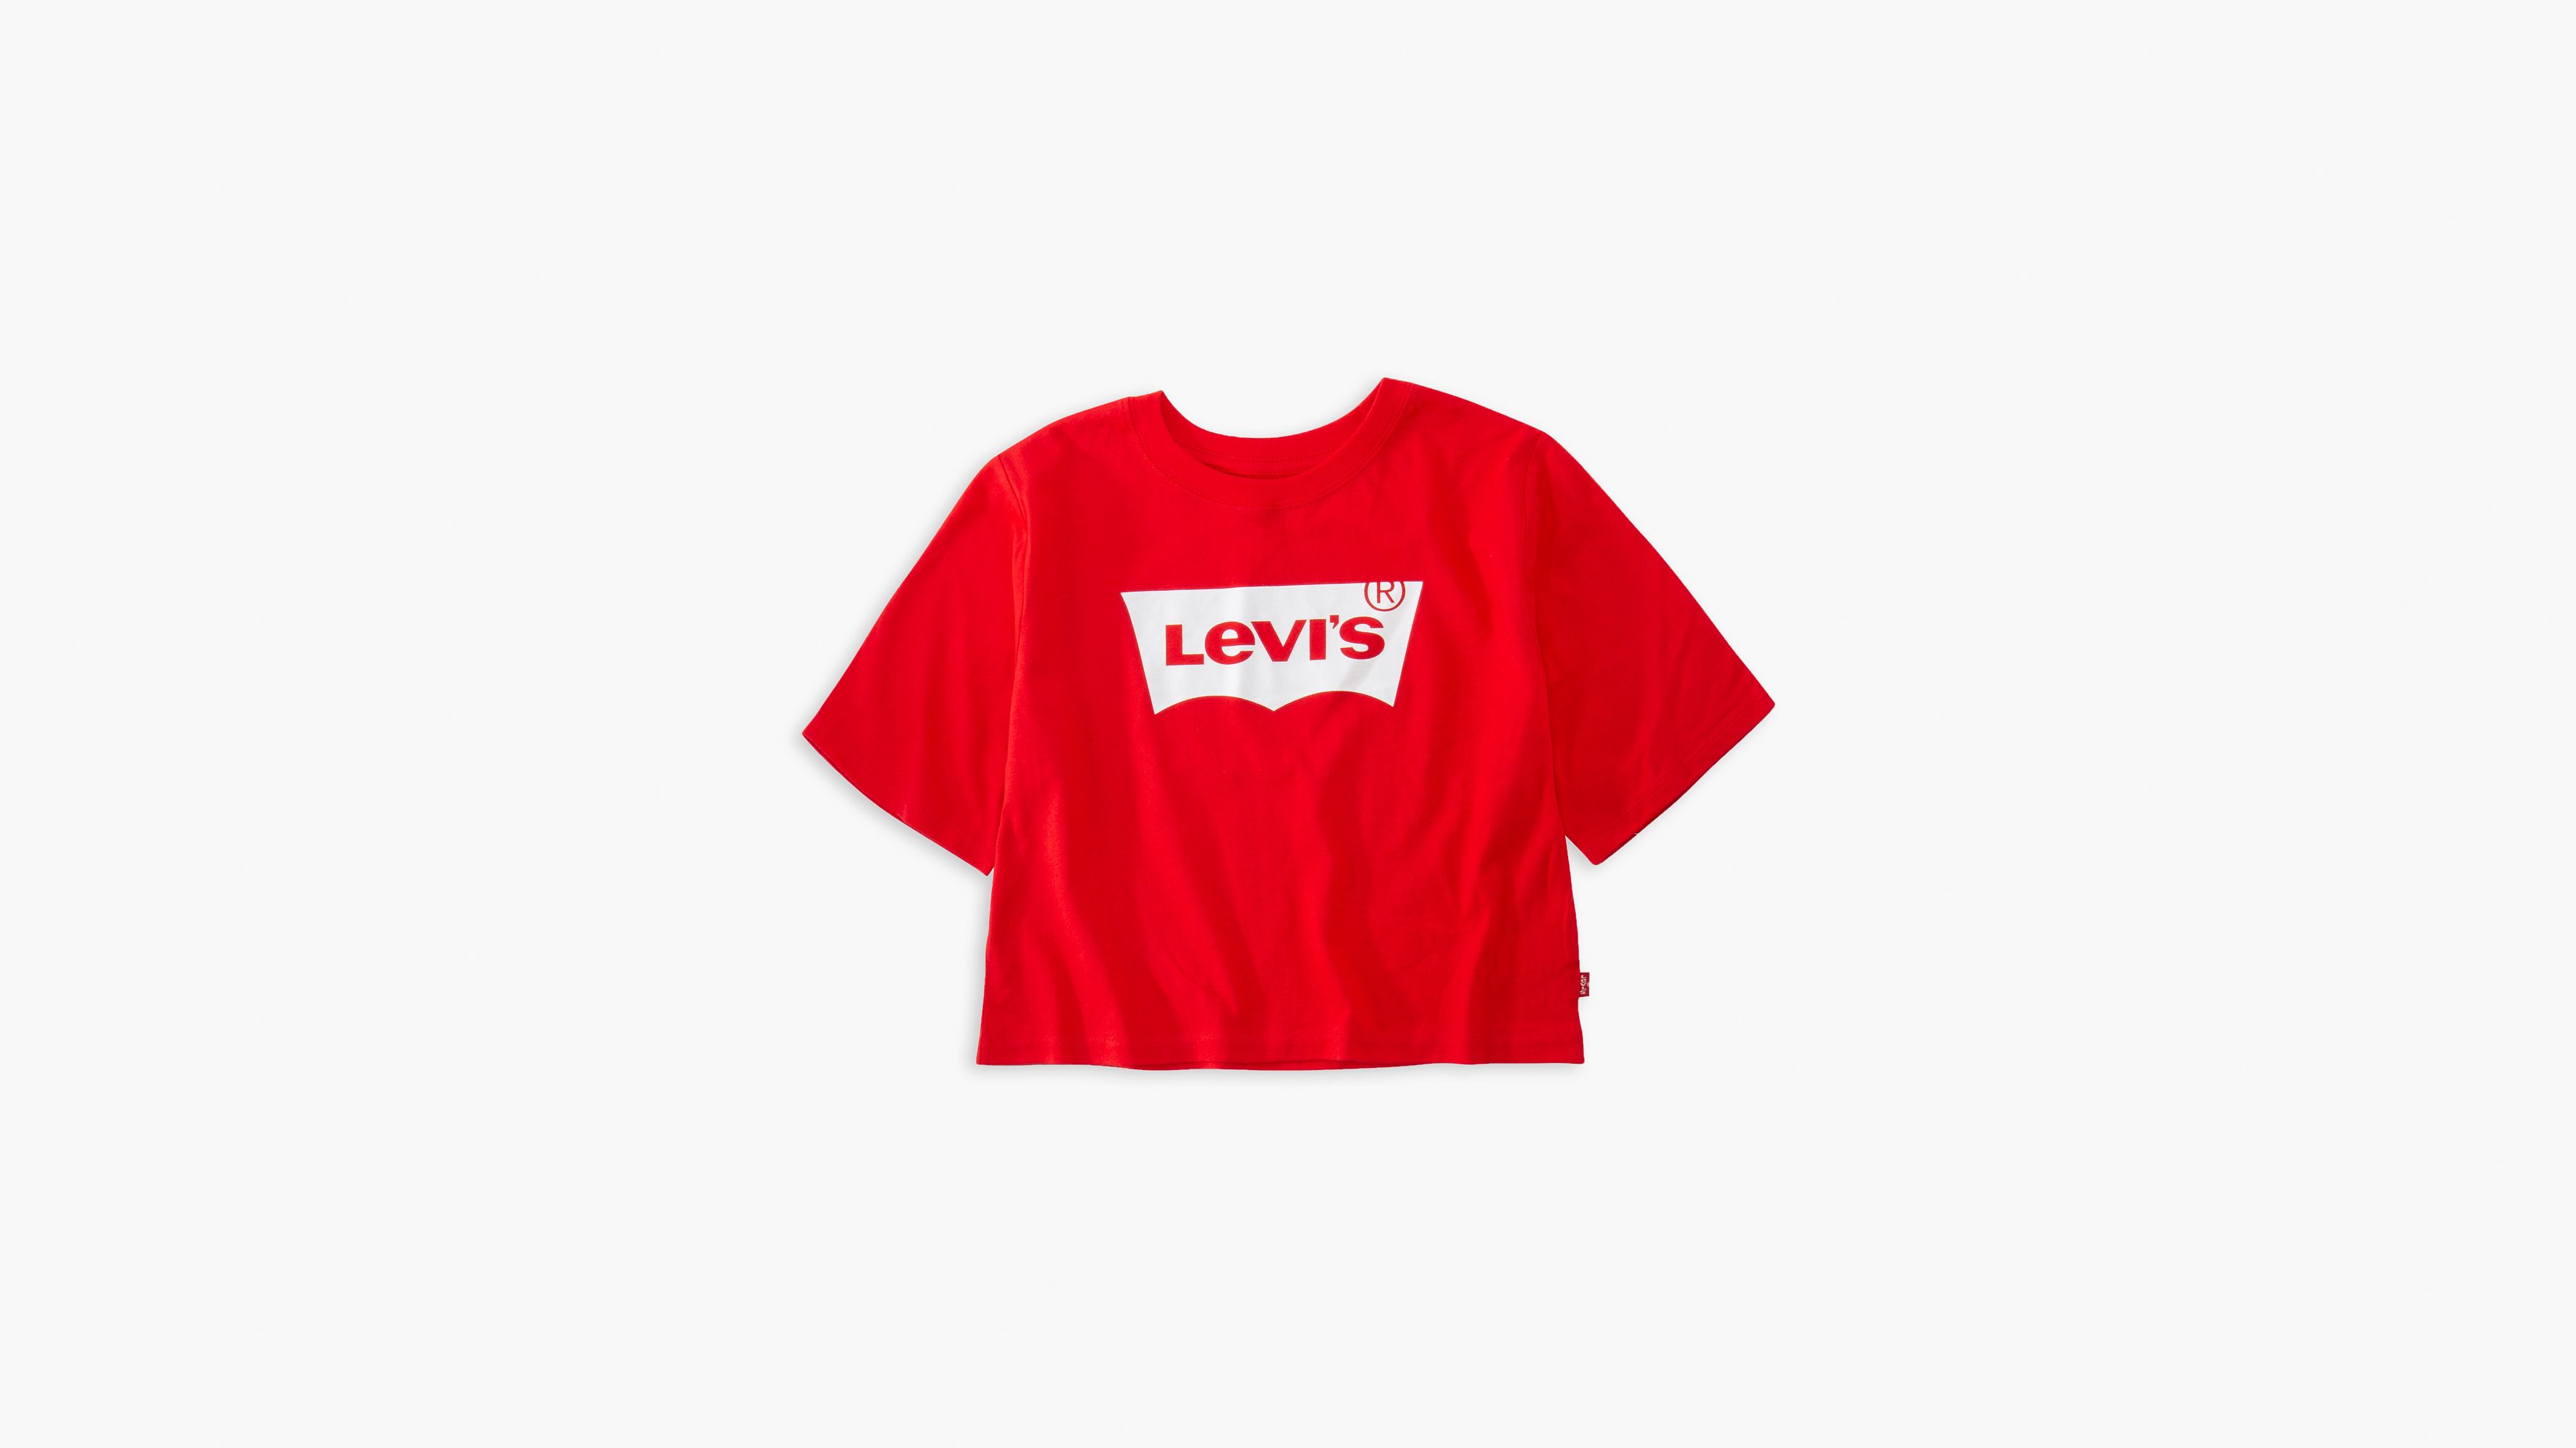 levi's uncovered truth